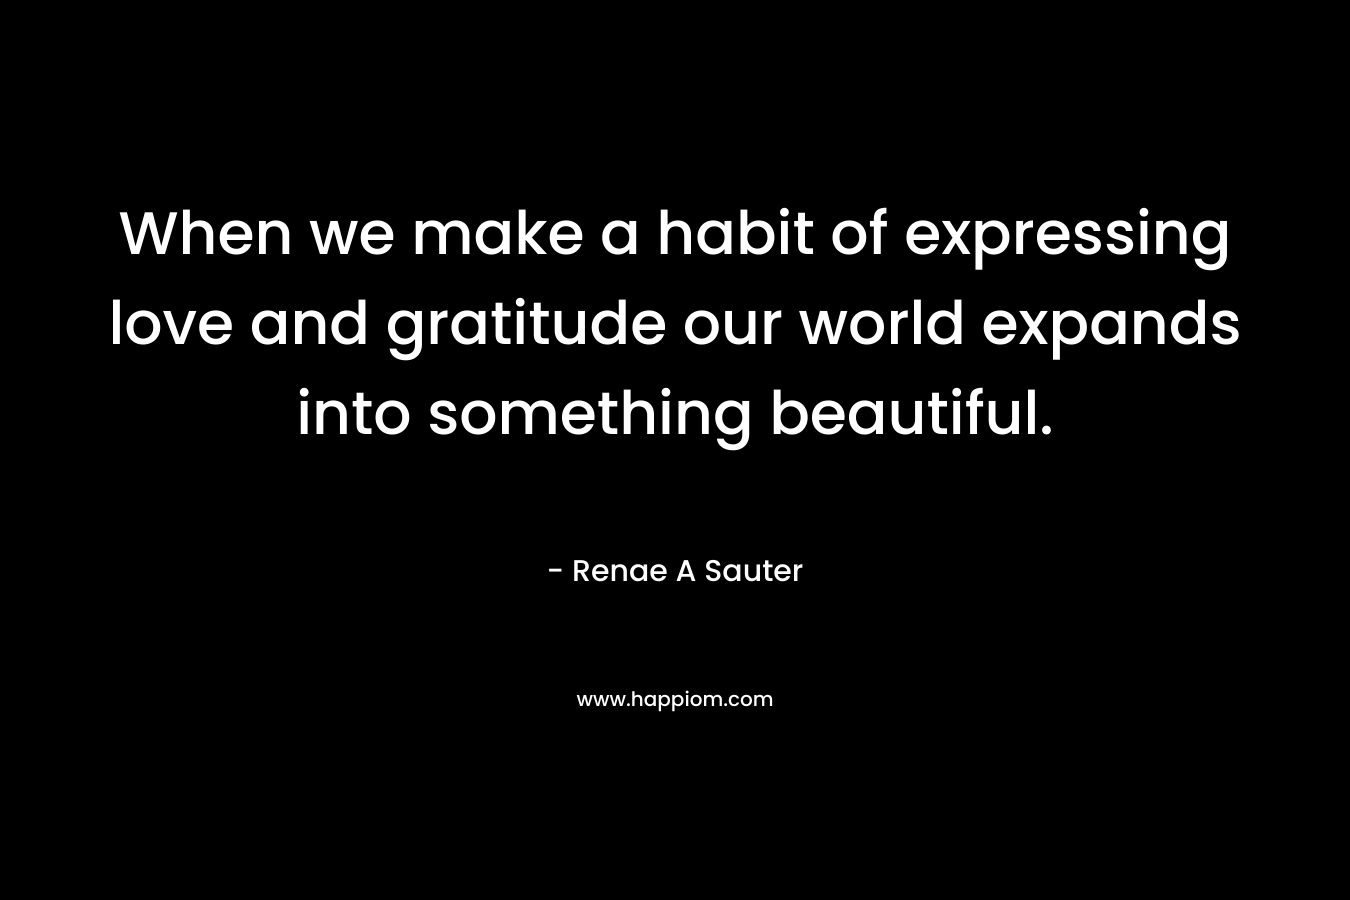 When we make a habit of expressing love and gratitude our world expands into something beautiful. – Renae A Sauter